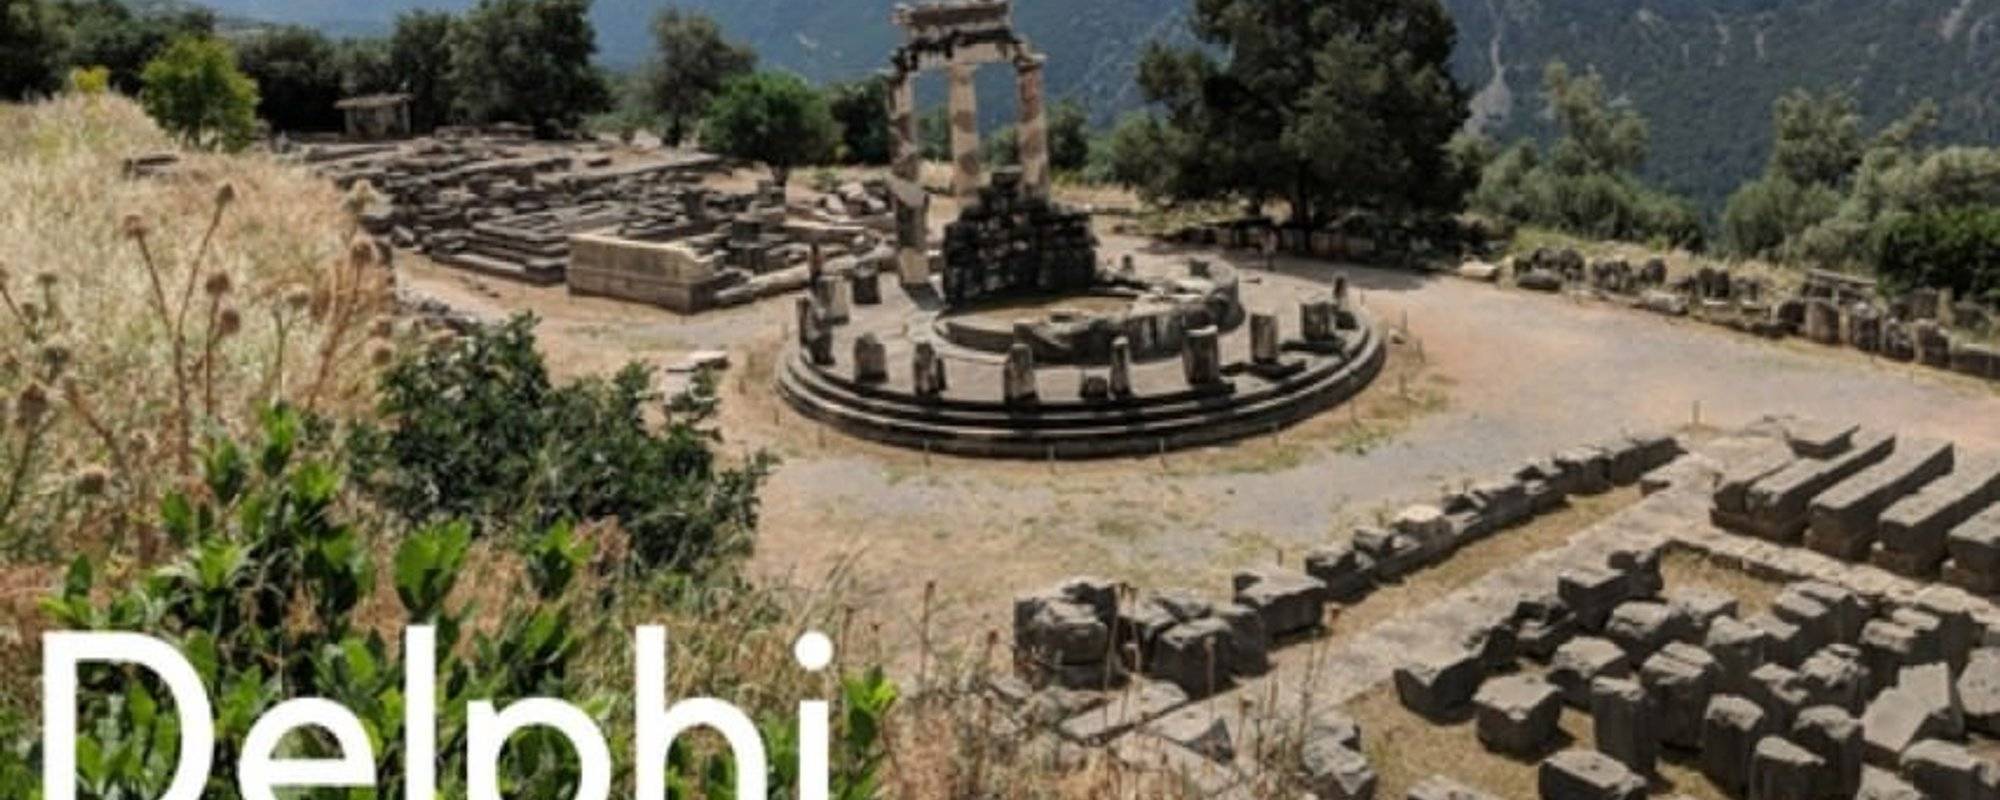 Delphi—hangovers, high priestesses, and Greece's best dog!